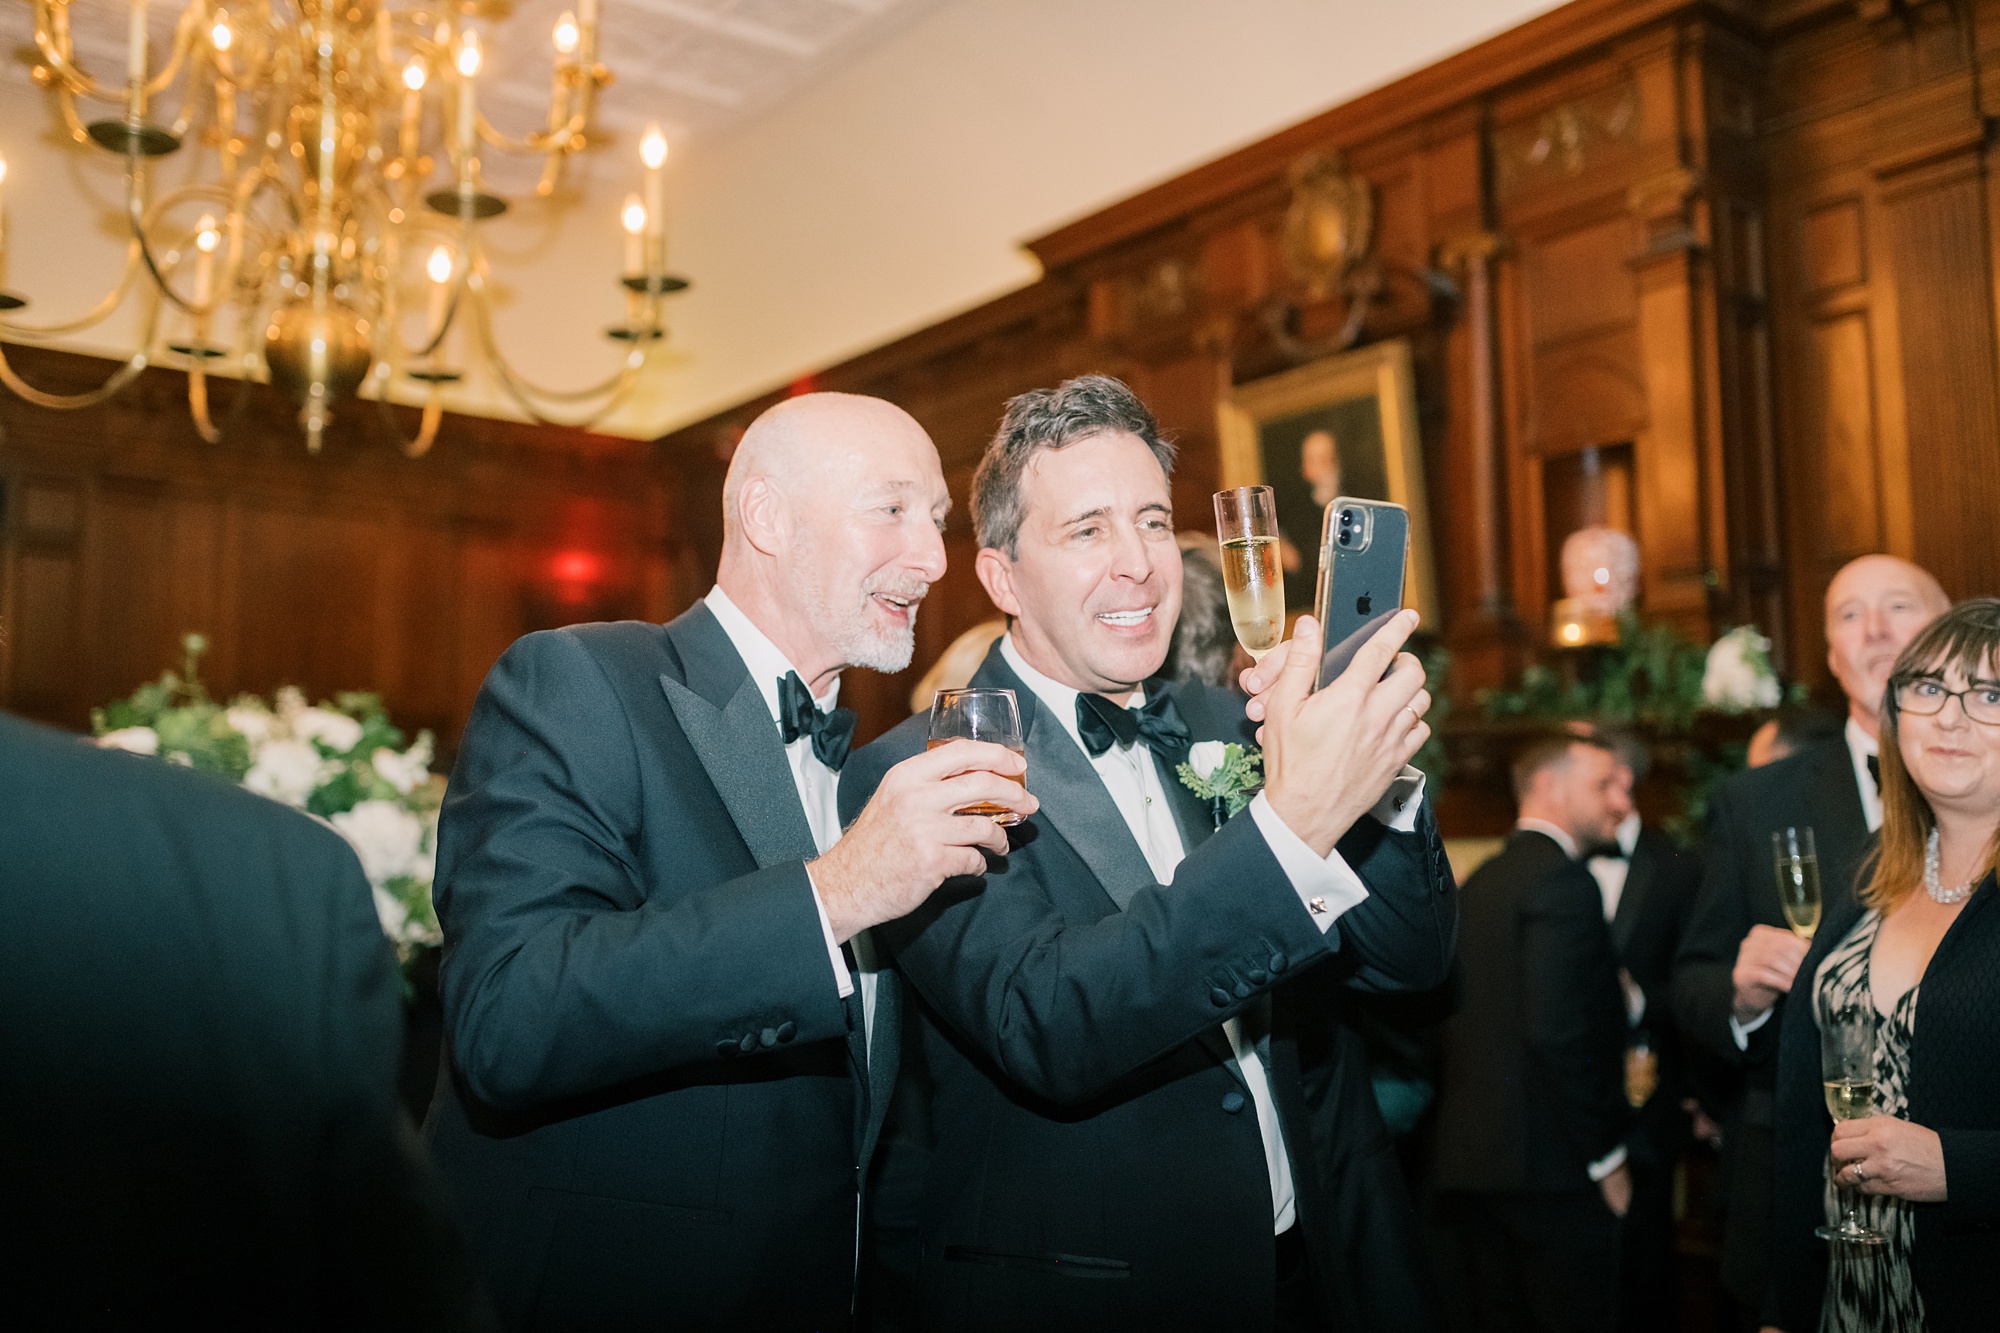 guests look at phone during cocktail hour at the Hay Adams Hotel